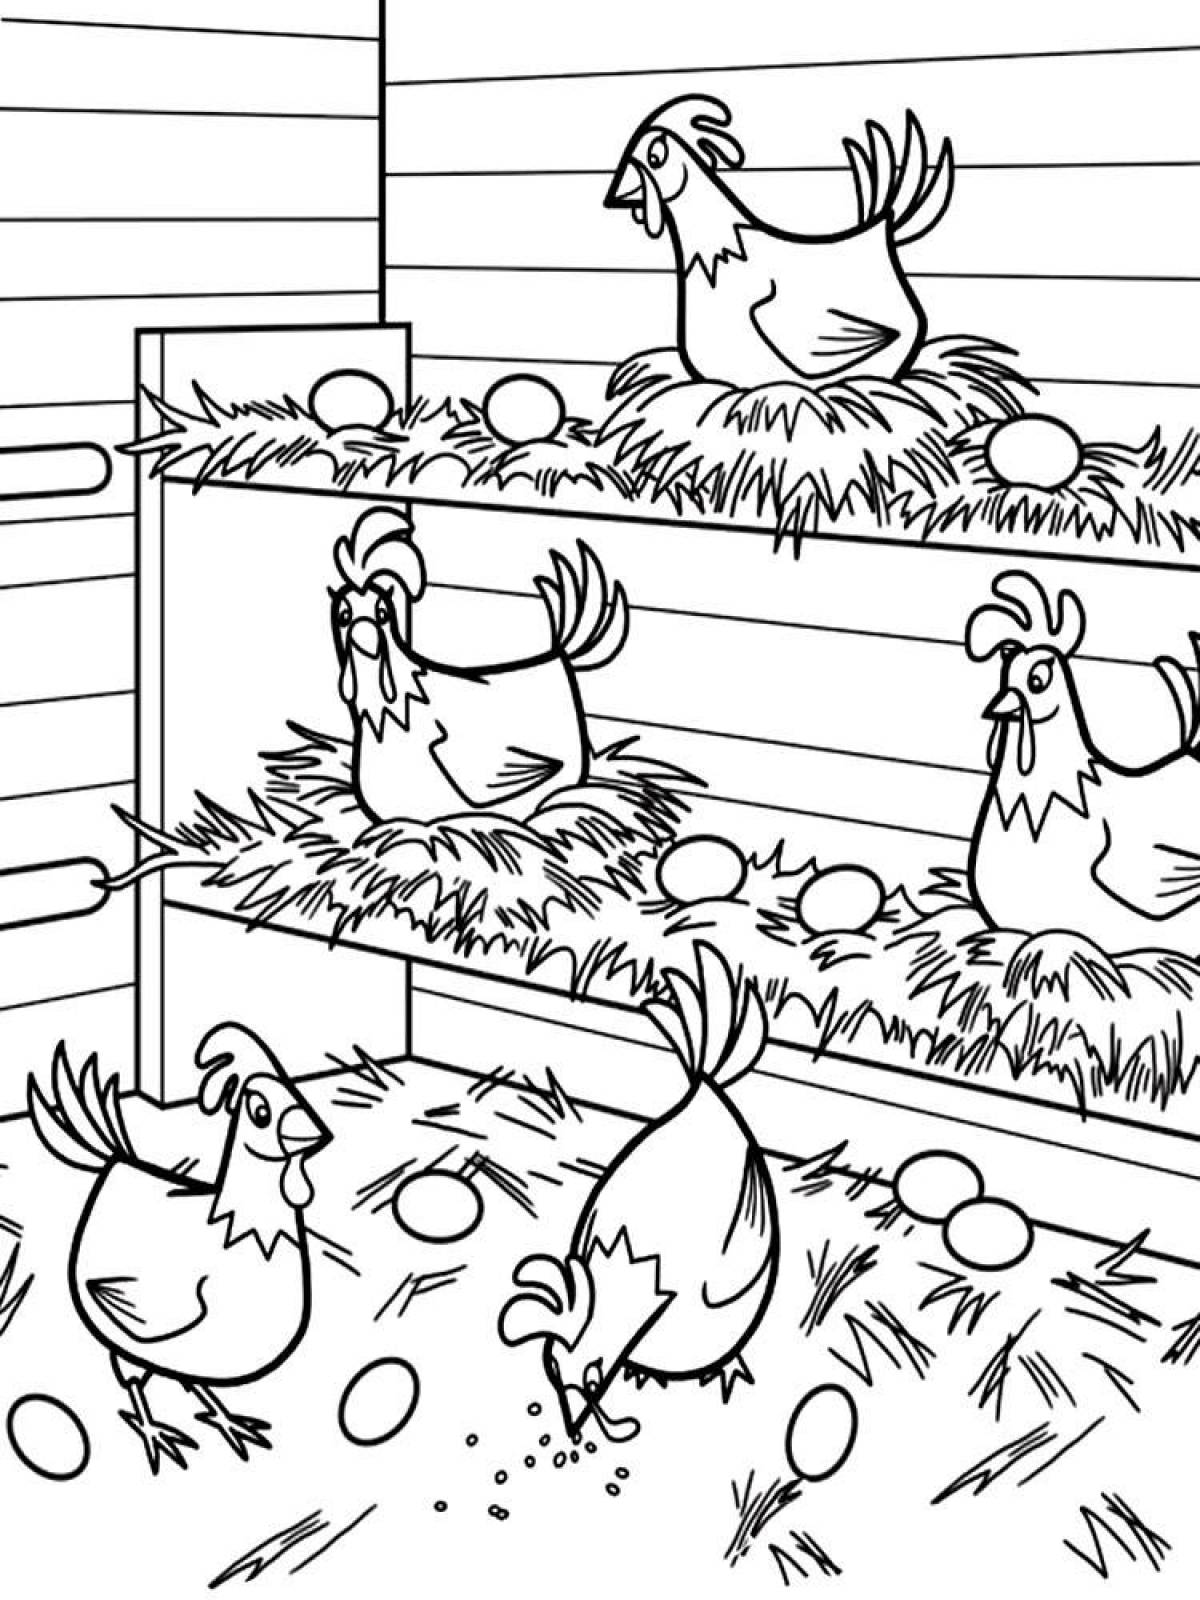 Cute poultry coloring page